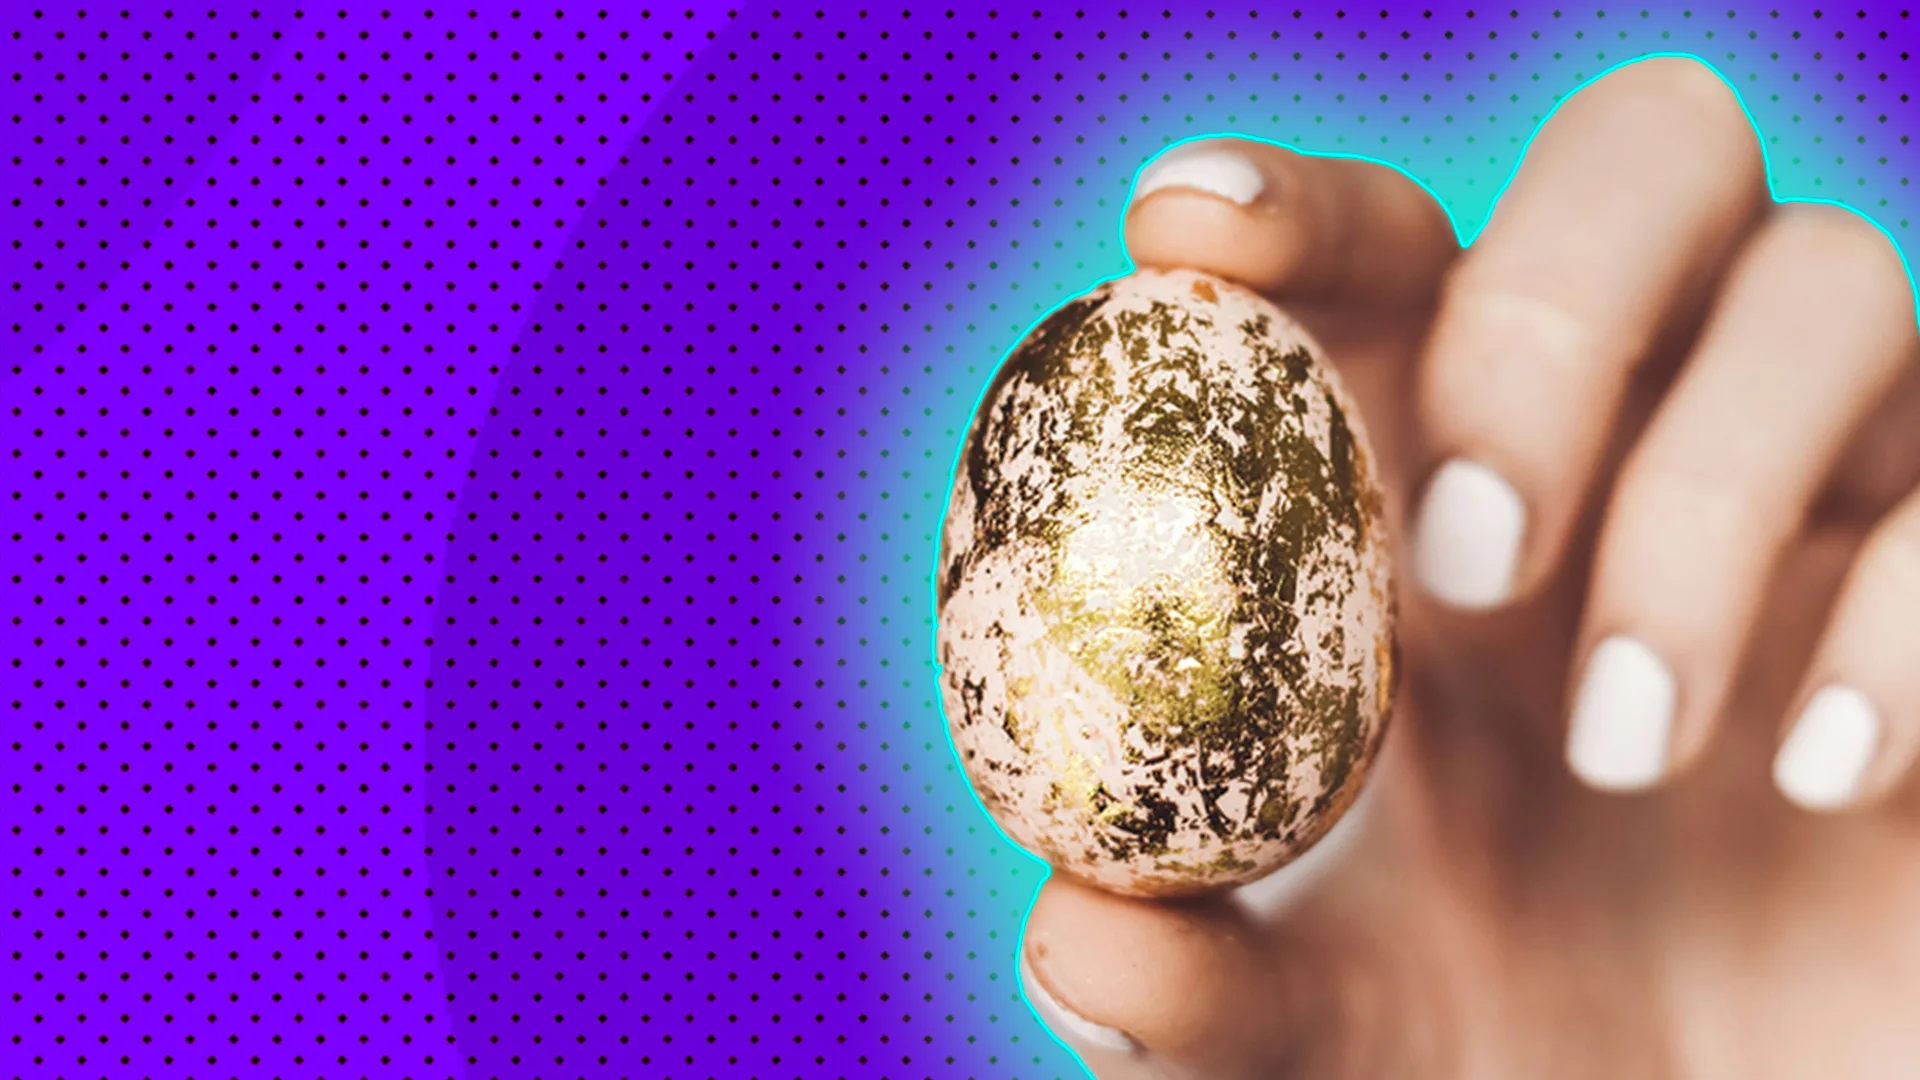 Hand holding egg decorated in gold leaf, against a purple spotty background